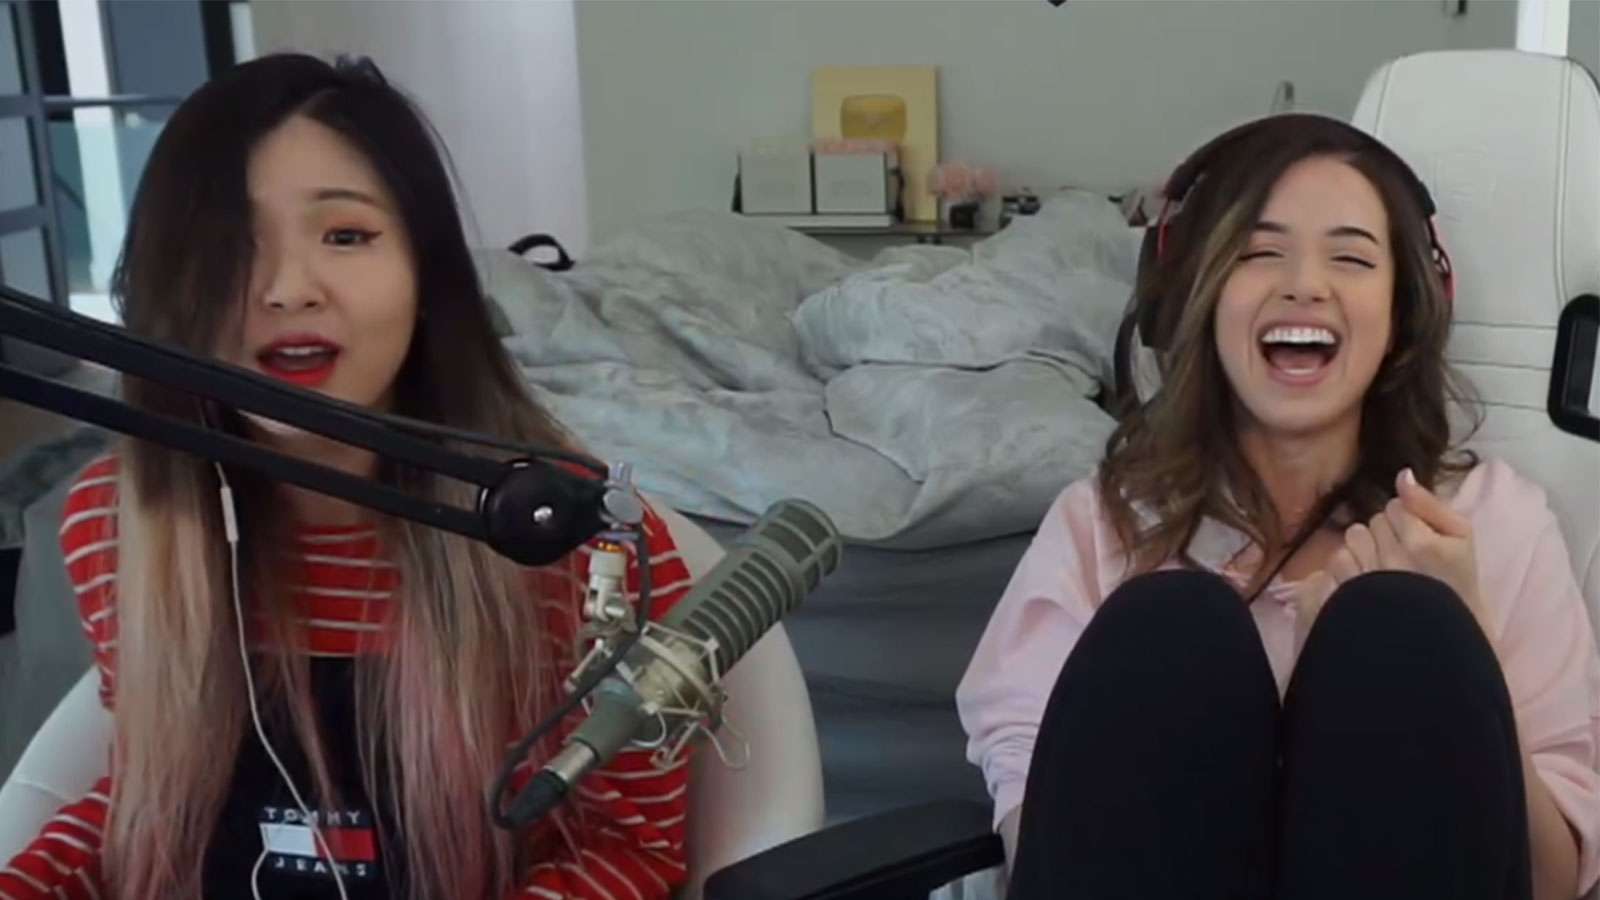 Hachubby looks shocked while Pokimane laughs